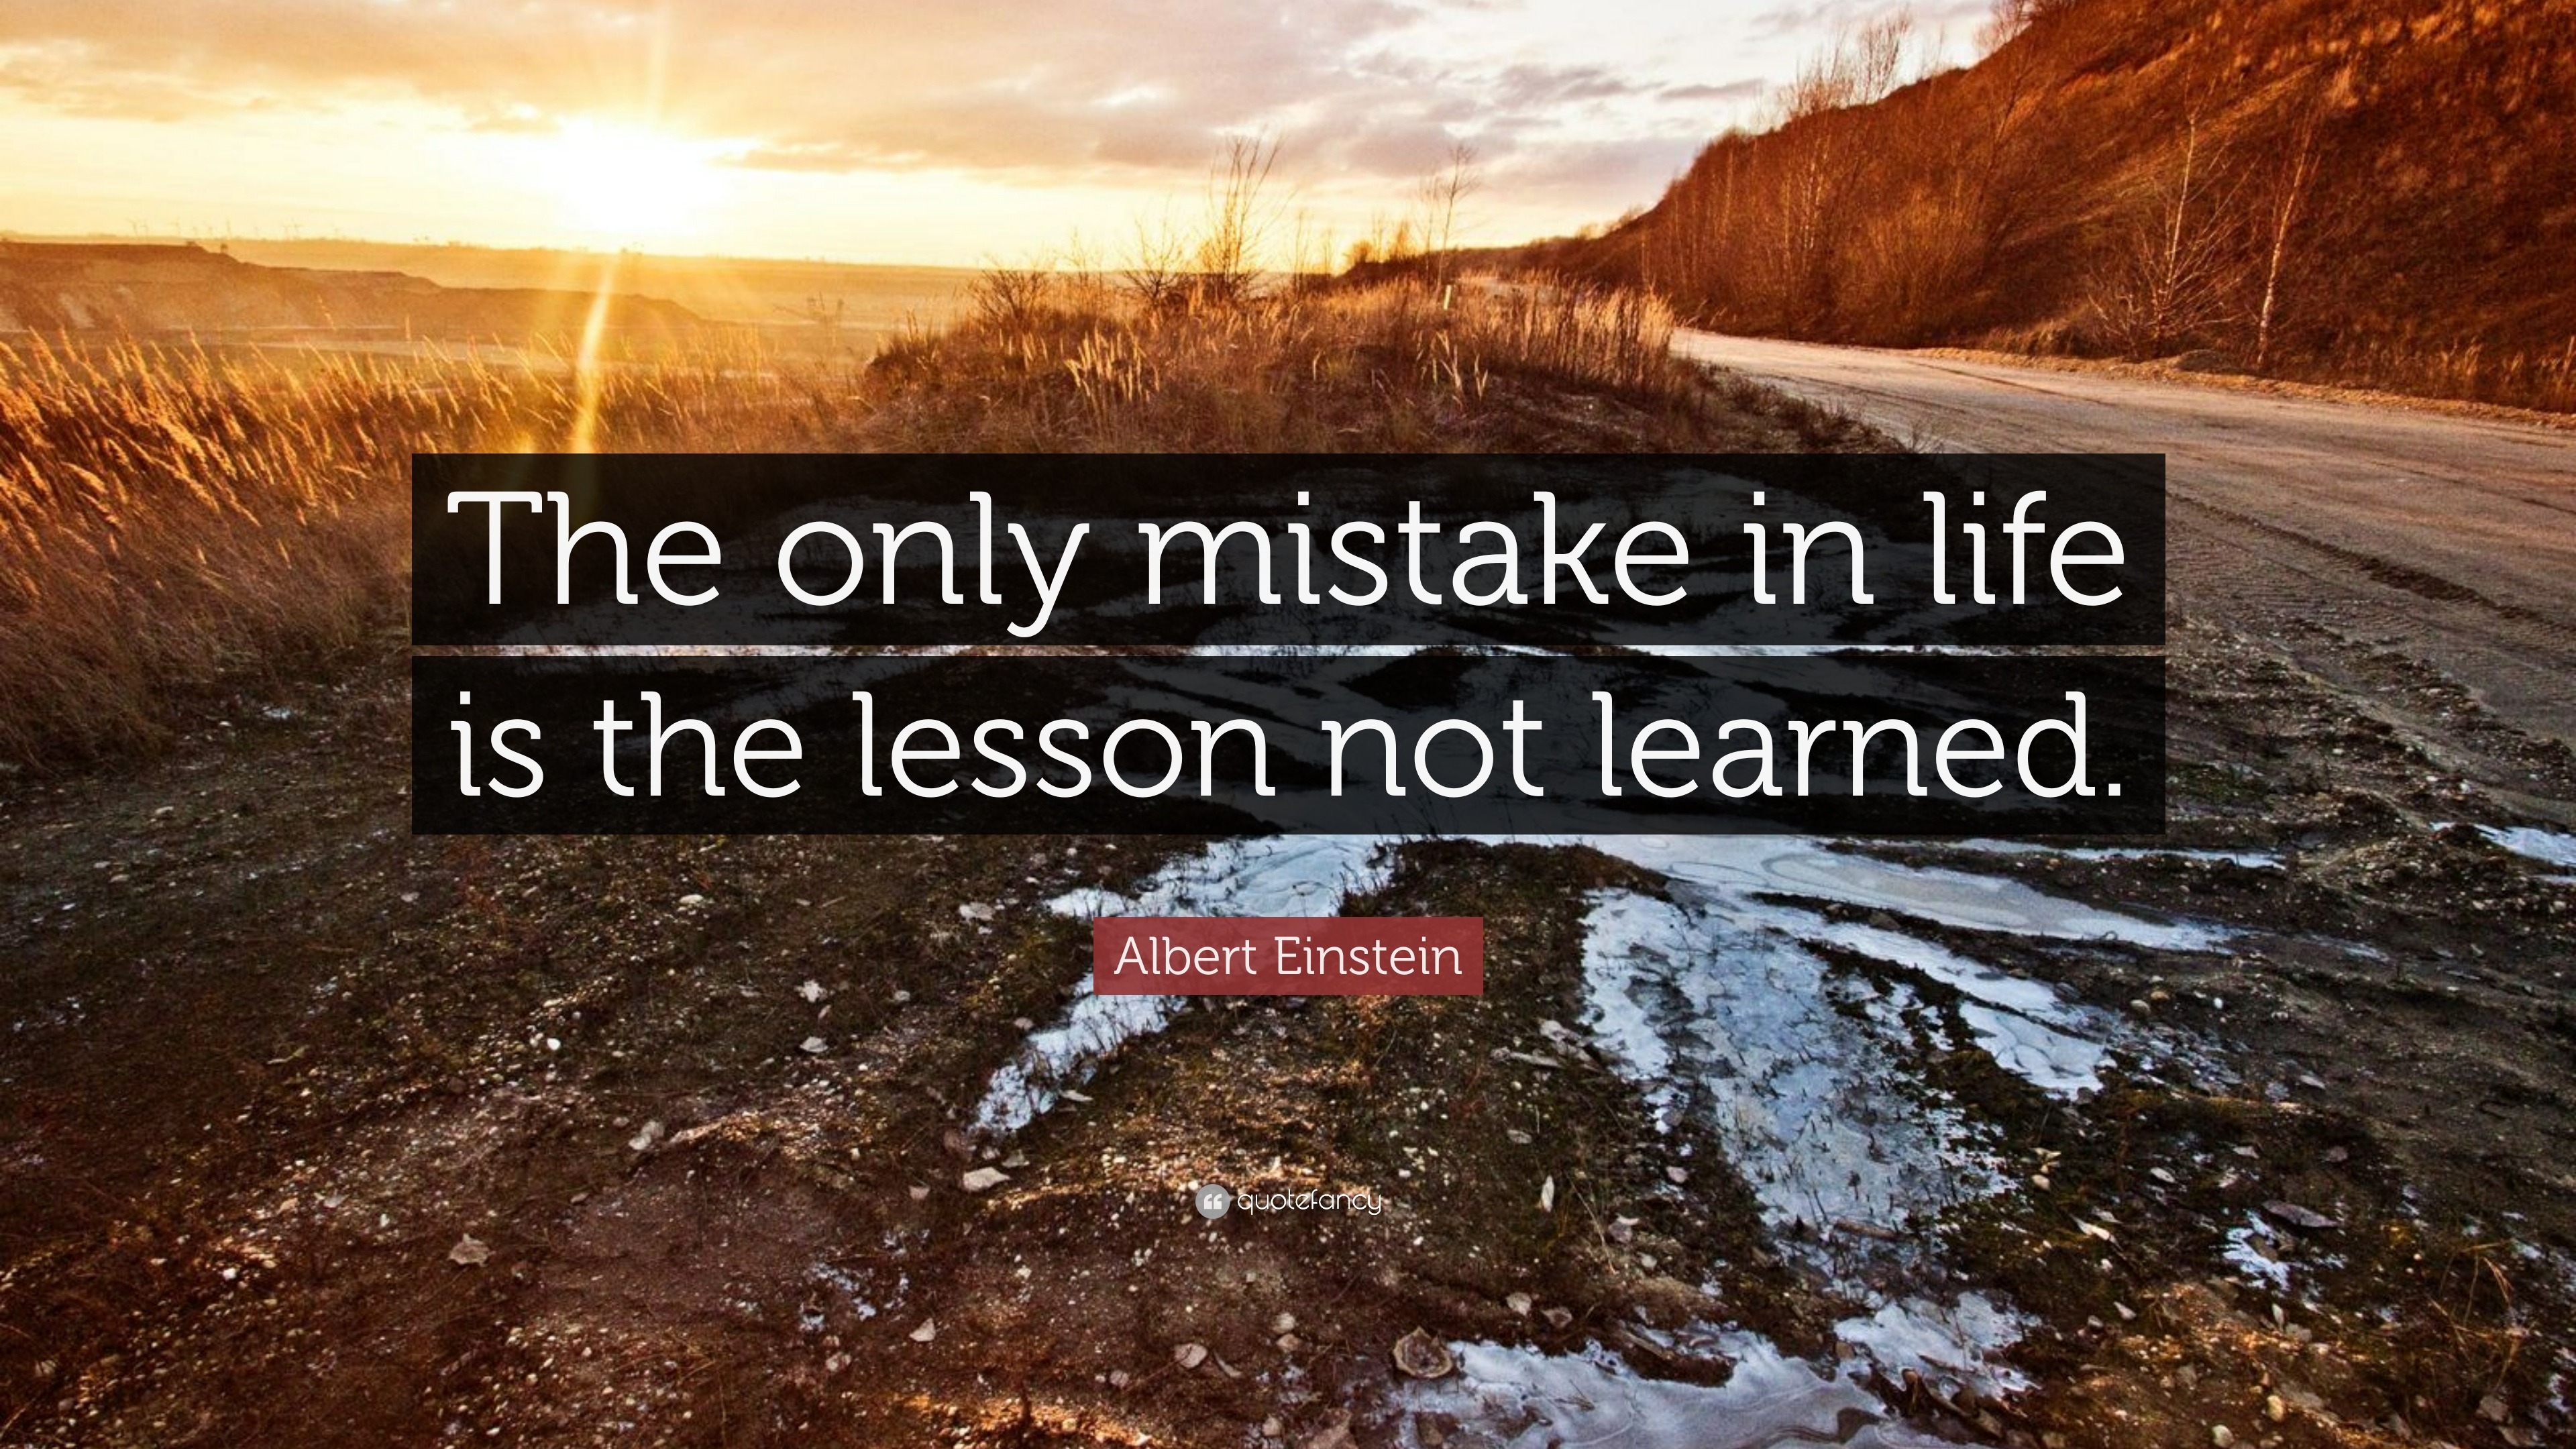 Albert Einstein Quote  The only mistake  in life  is the 